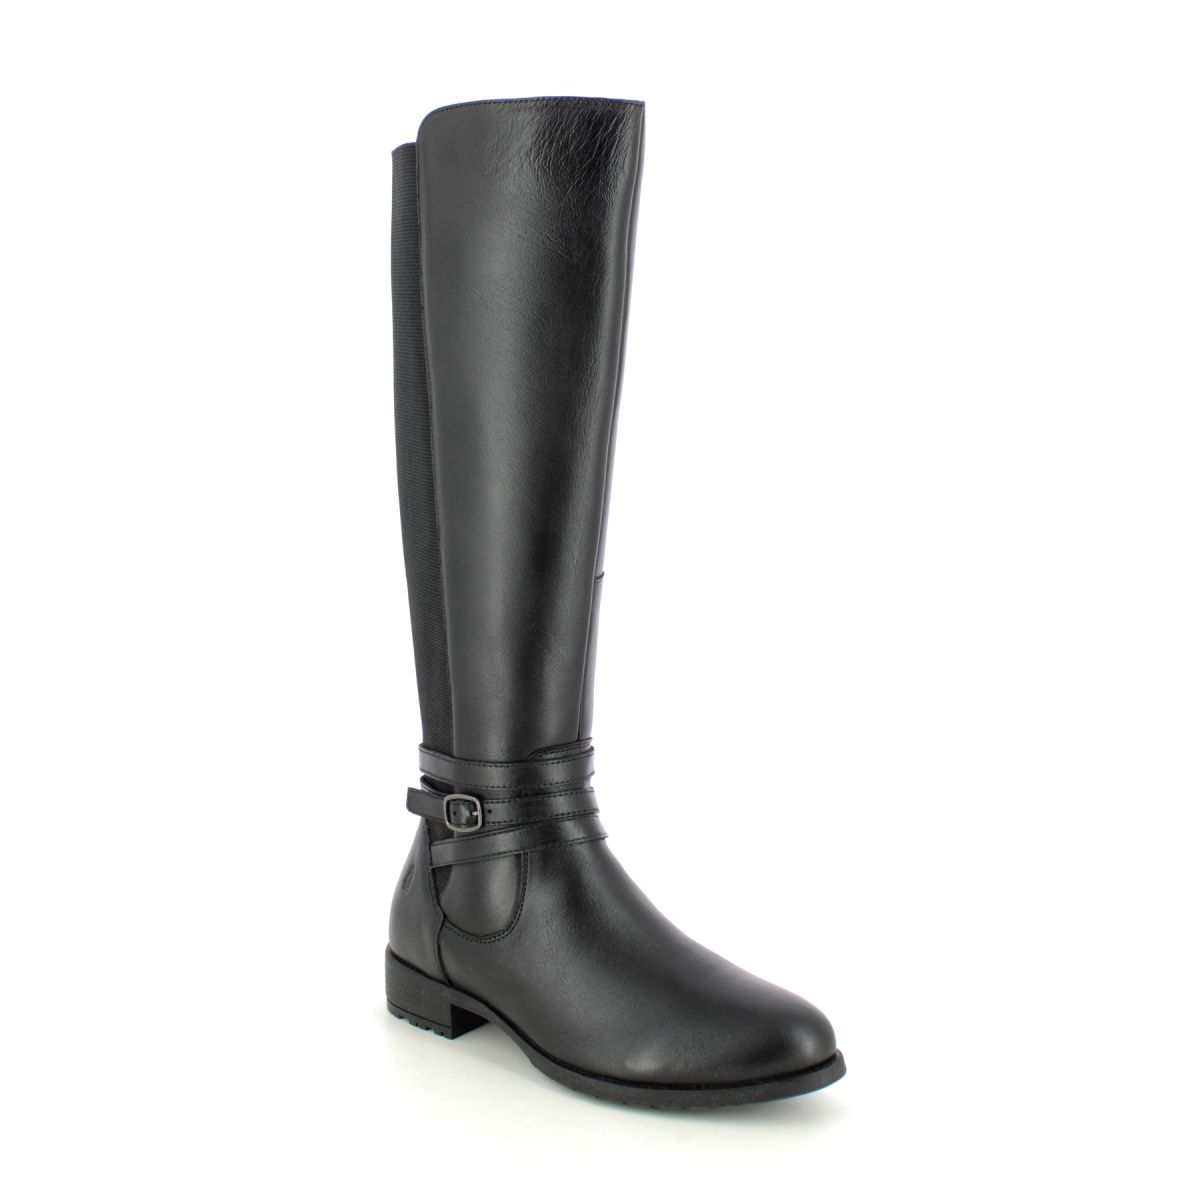 Hush Puppies Vanessa Stretch Black leather Womens knee-high boots 32842-56033 in a Plain Leather in Size 4